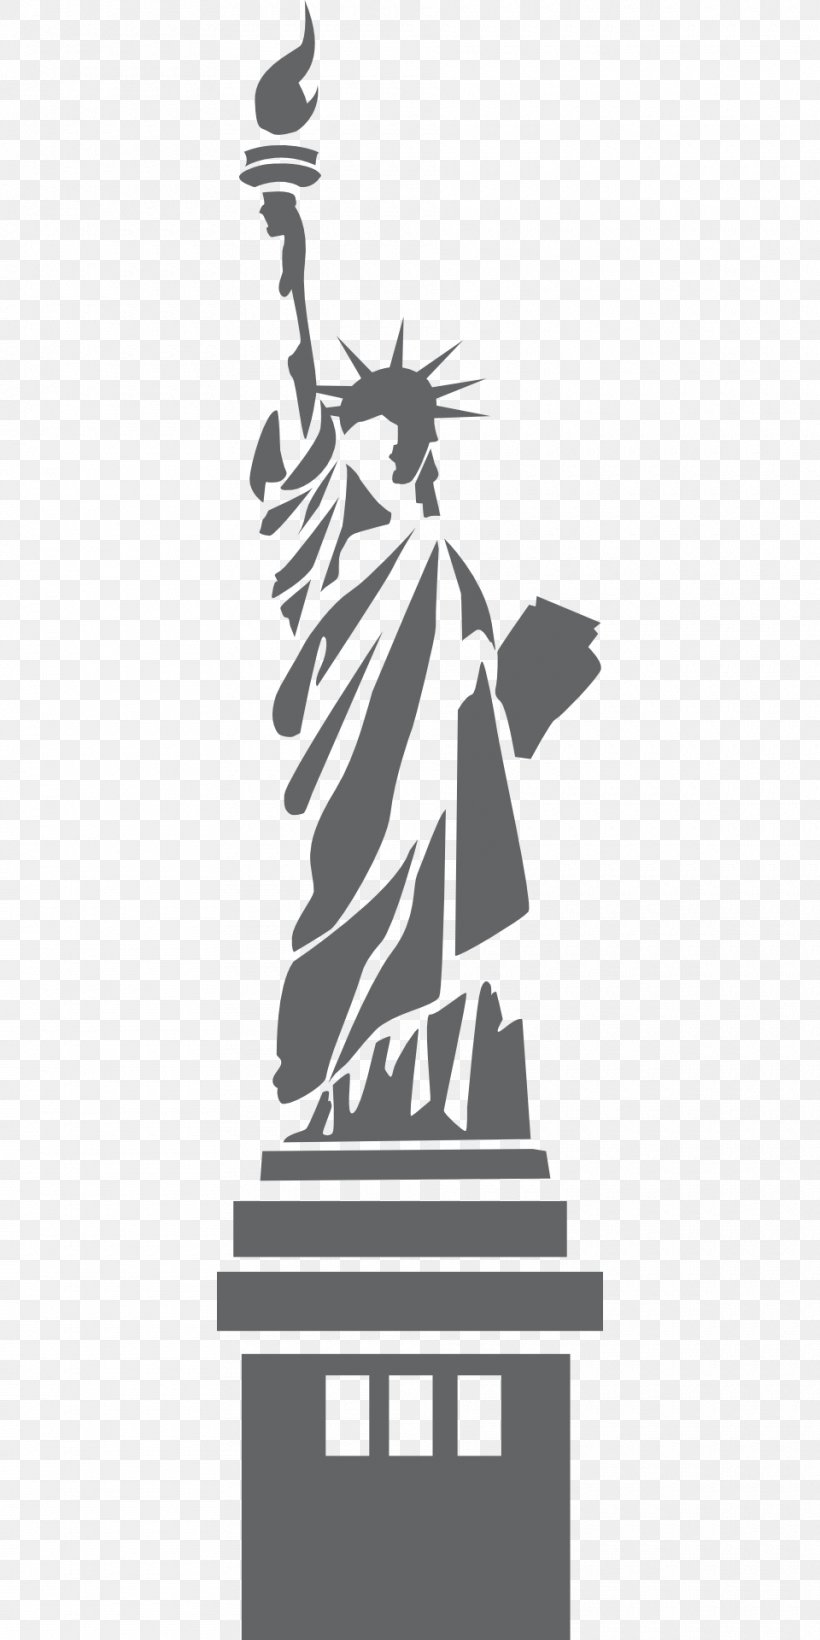 Statue Of Liberty Clip Art, PNG, 960x1920px, Statue Of Liberty, Black And White, Drawing, Landmark, Monochrome Download Free